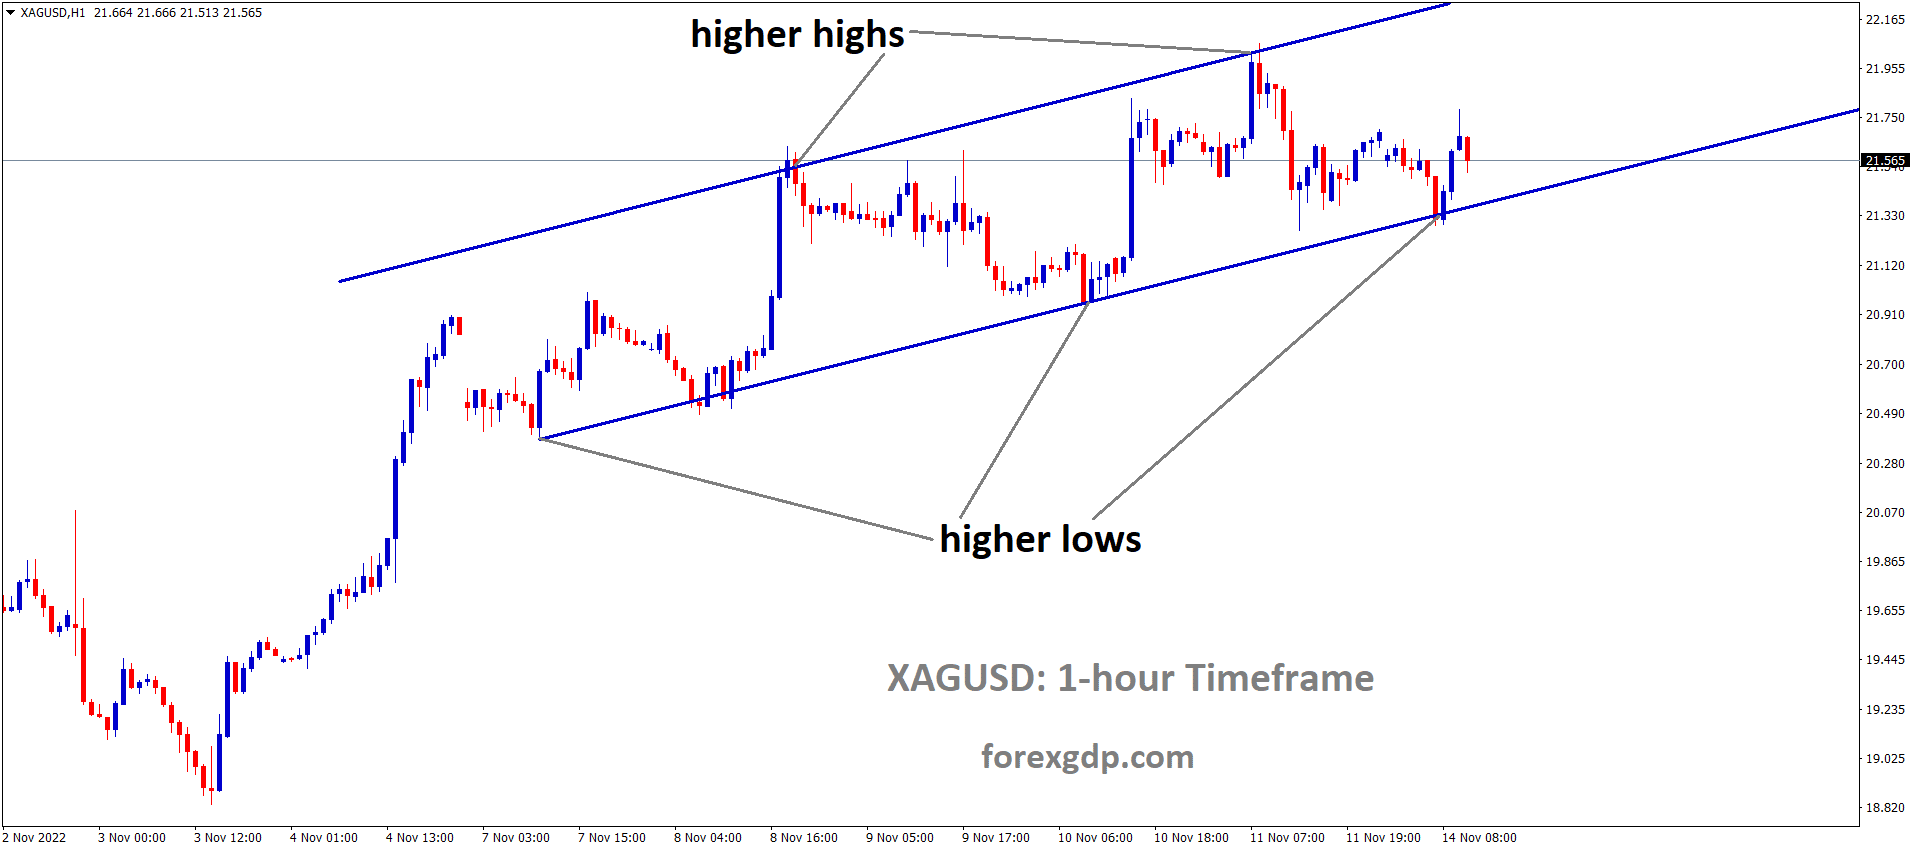 XAGUSD Silver Price is moving in an Ascending channel and the market has rebounded from the higher low area of the channel